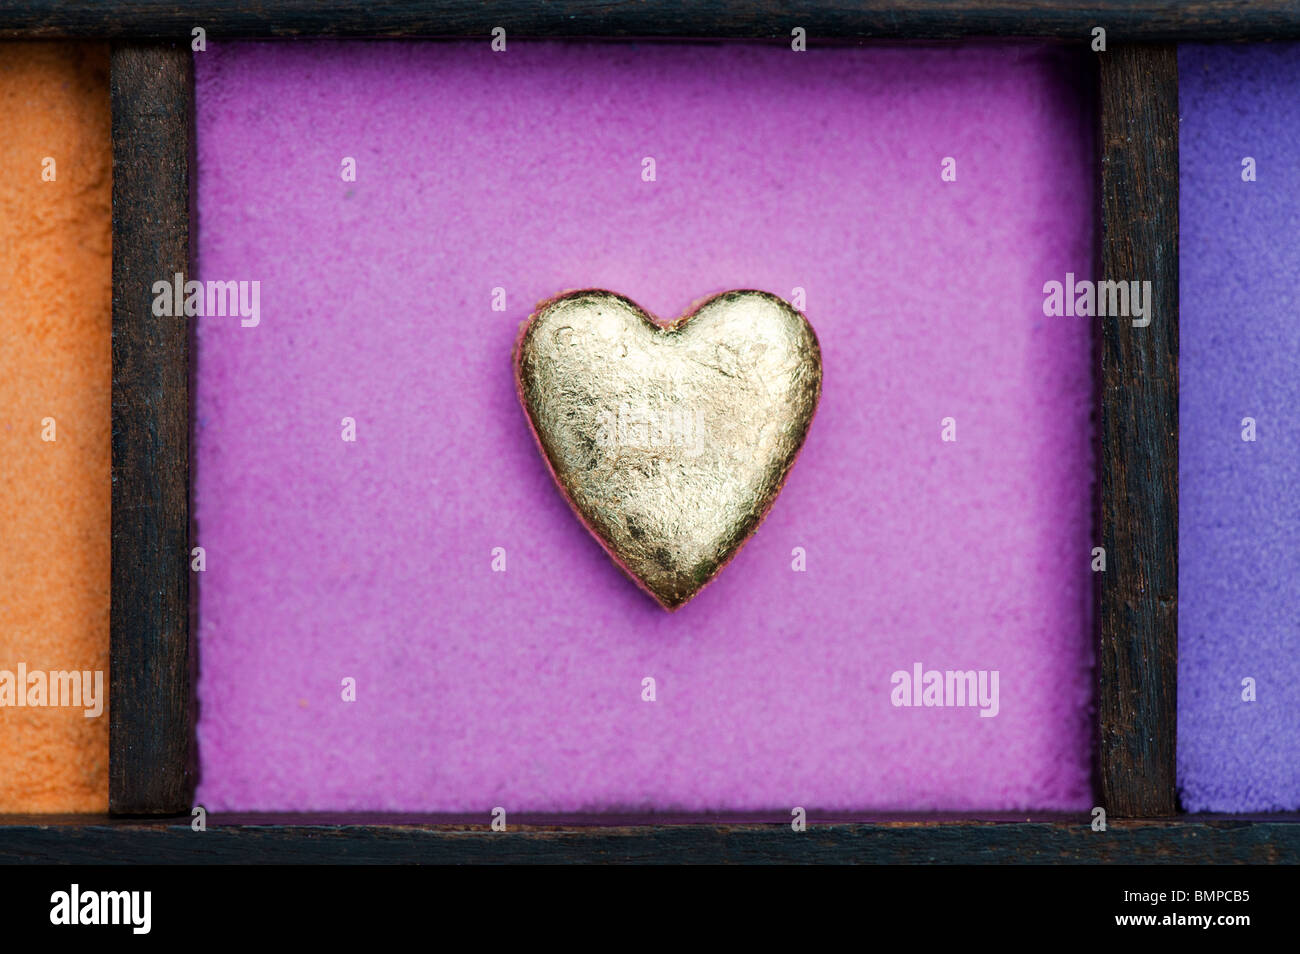 Gold heart shape against pink sand in a wooden tray Stock Photo